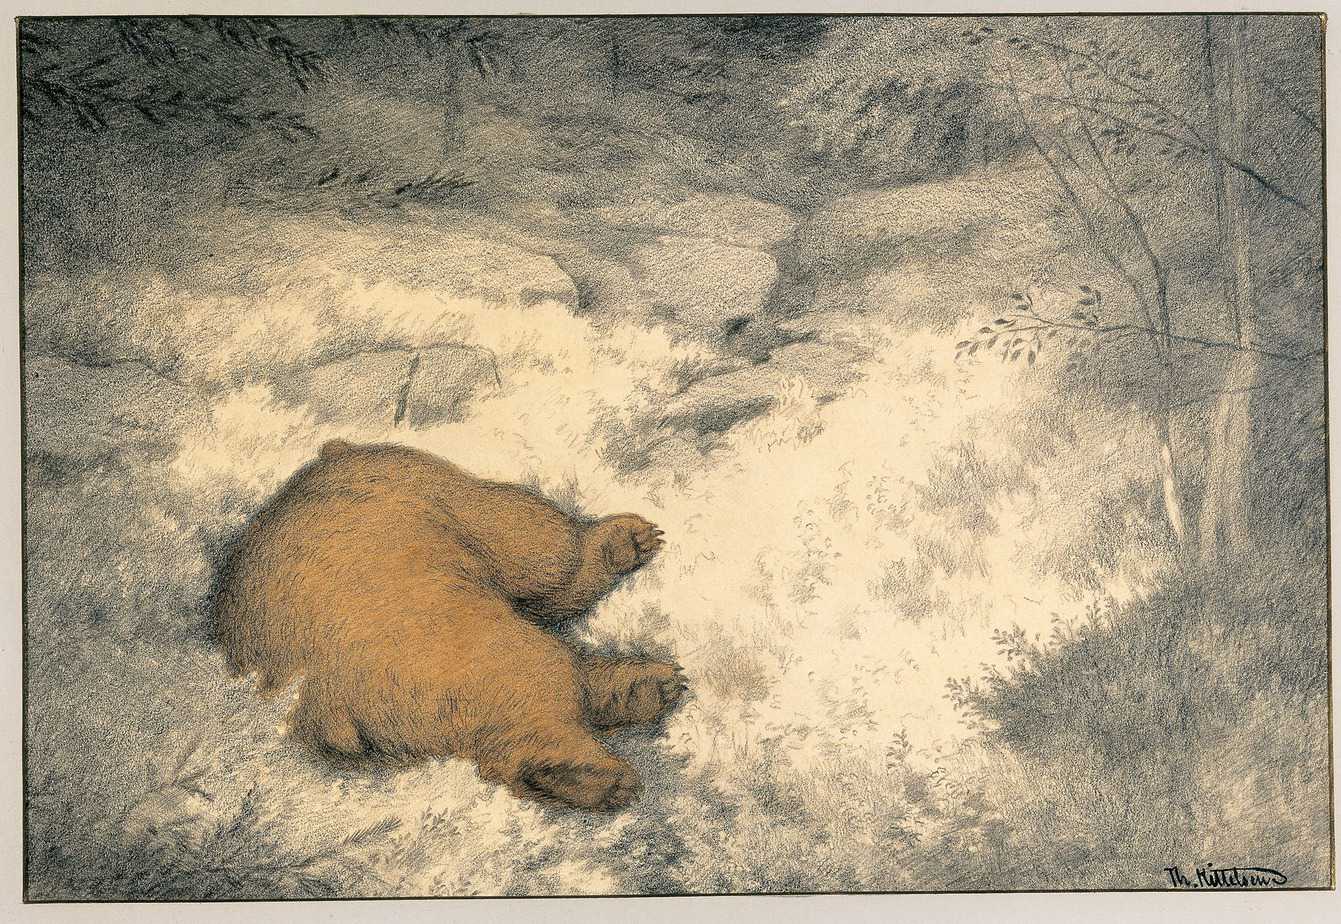 Bruin Asleep in the Blueberry Bushes. From Tirelil Tove series Theodor Kittelsen 1900